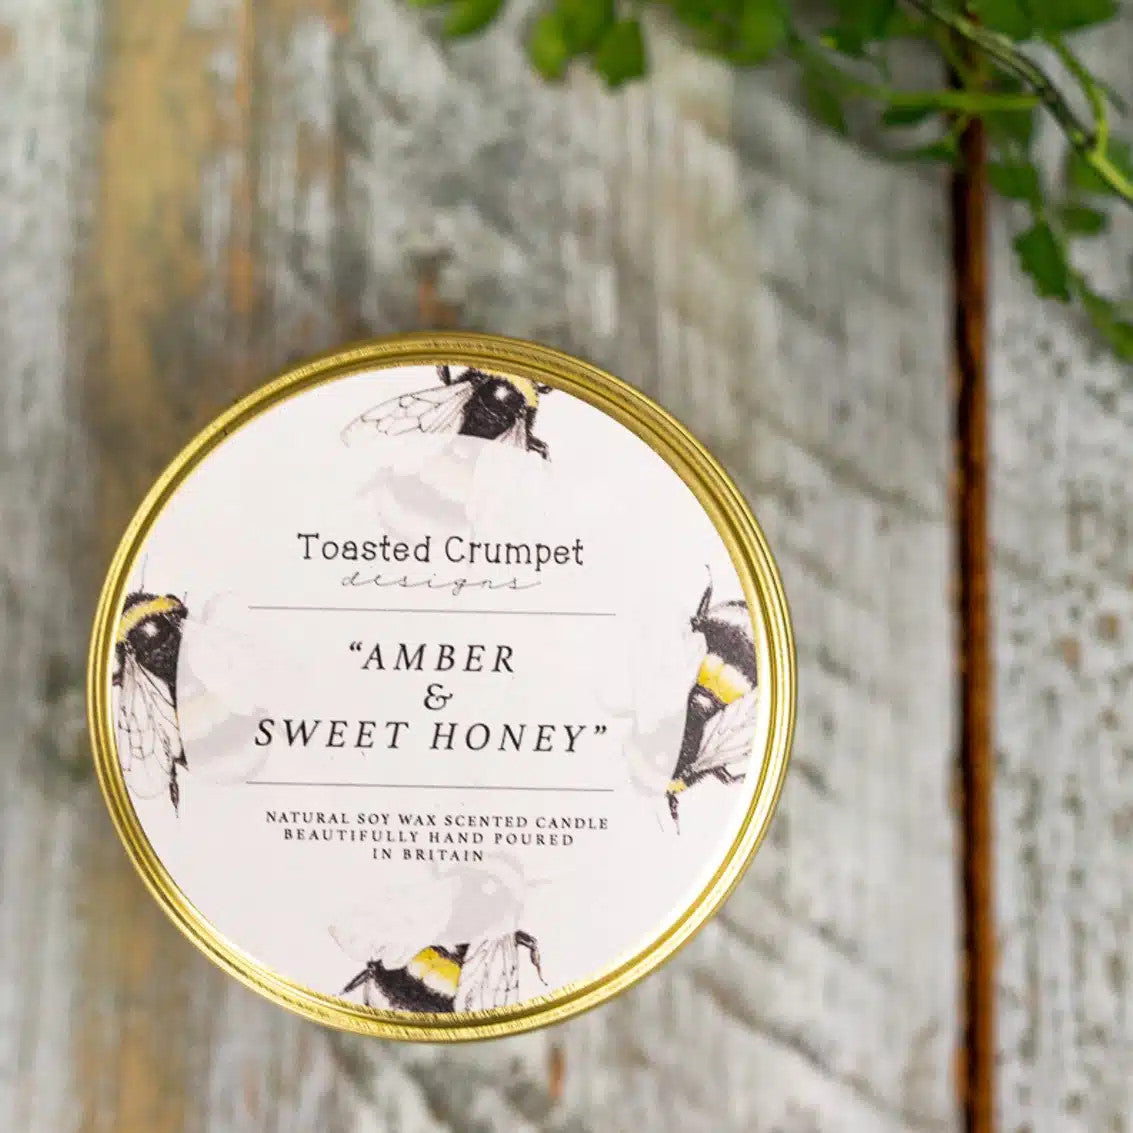 Amber & Sweet Honey Candle in a Matt Gold Tin by Toasted Crumpet.